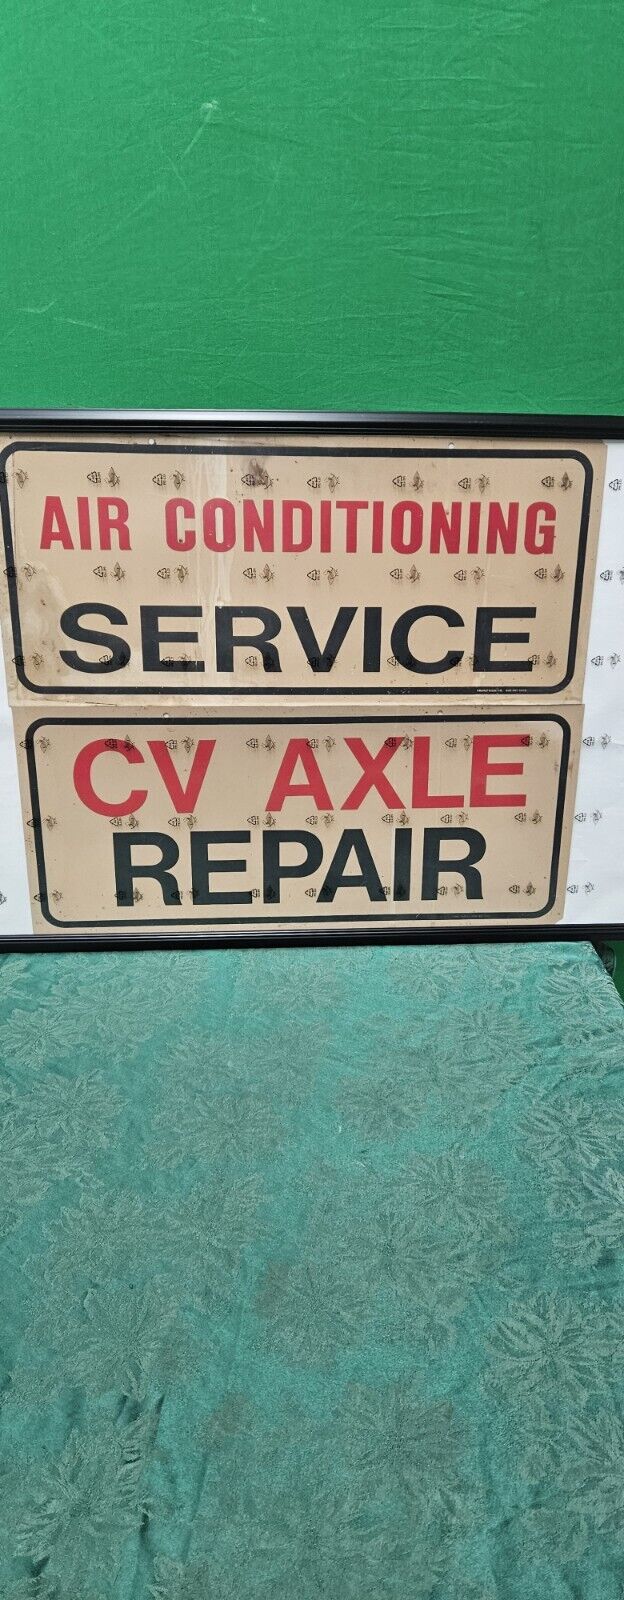 Vintage Hard Plastic Garage Signs Of Air Conditioning Service And Cv Axle Repair